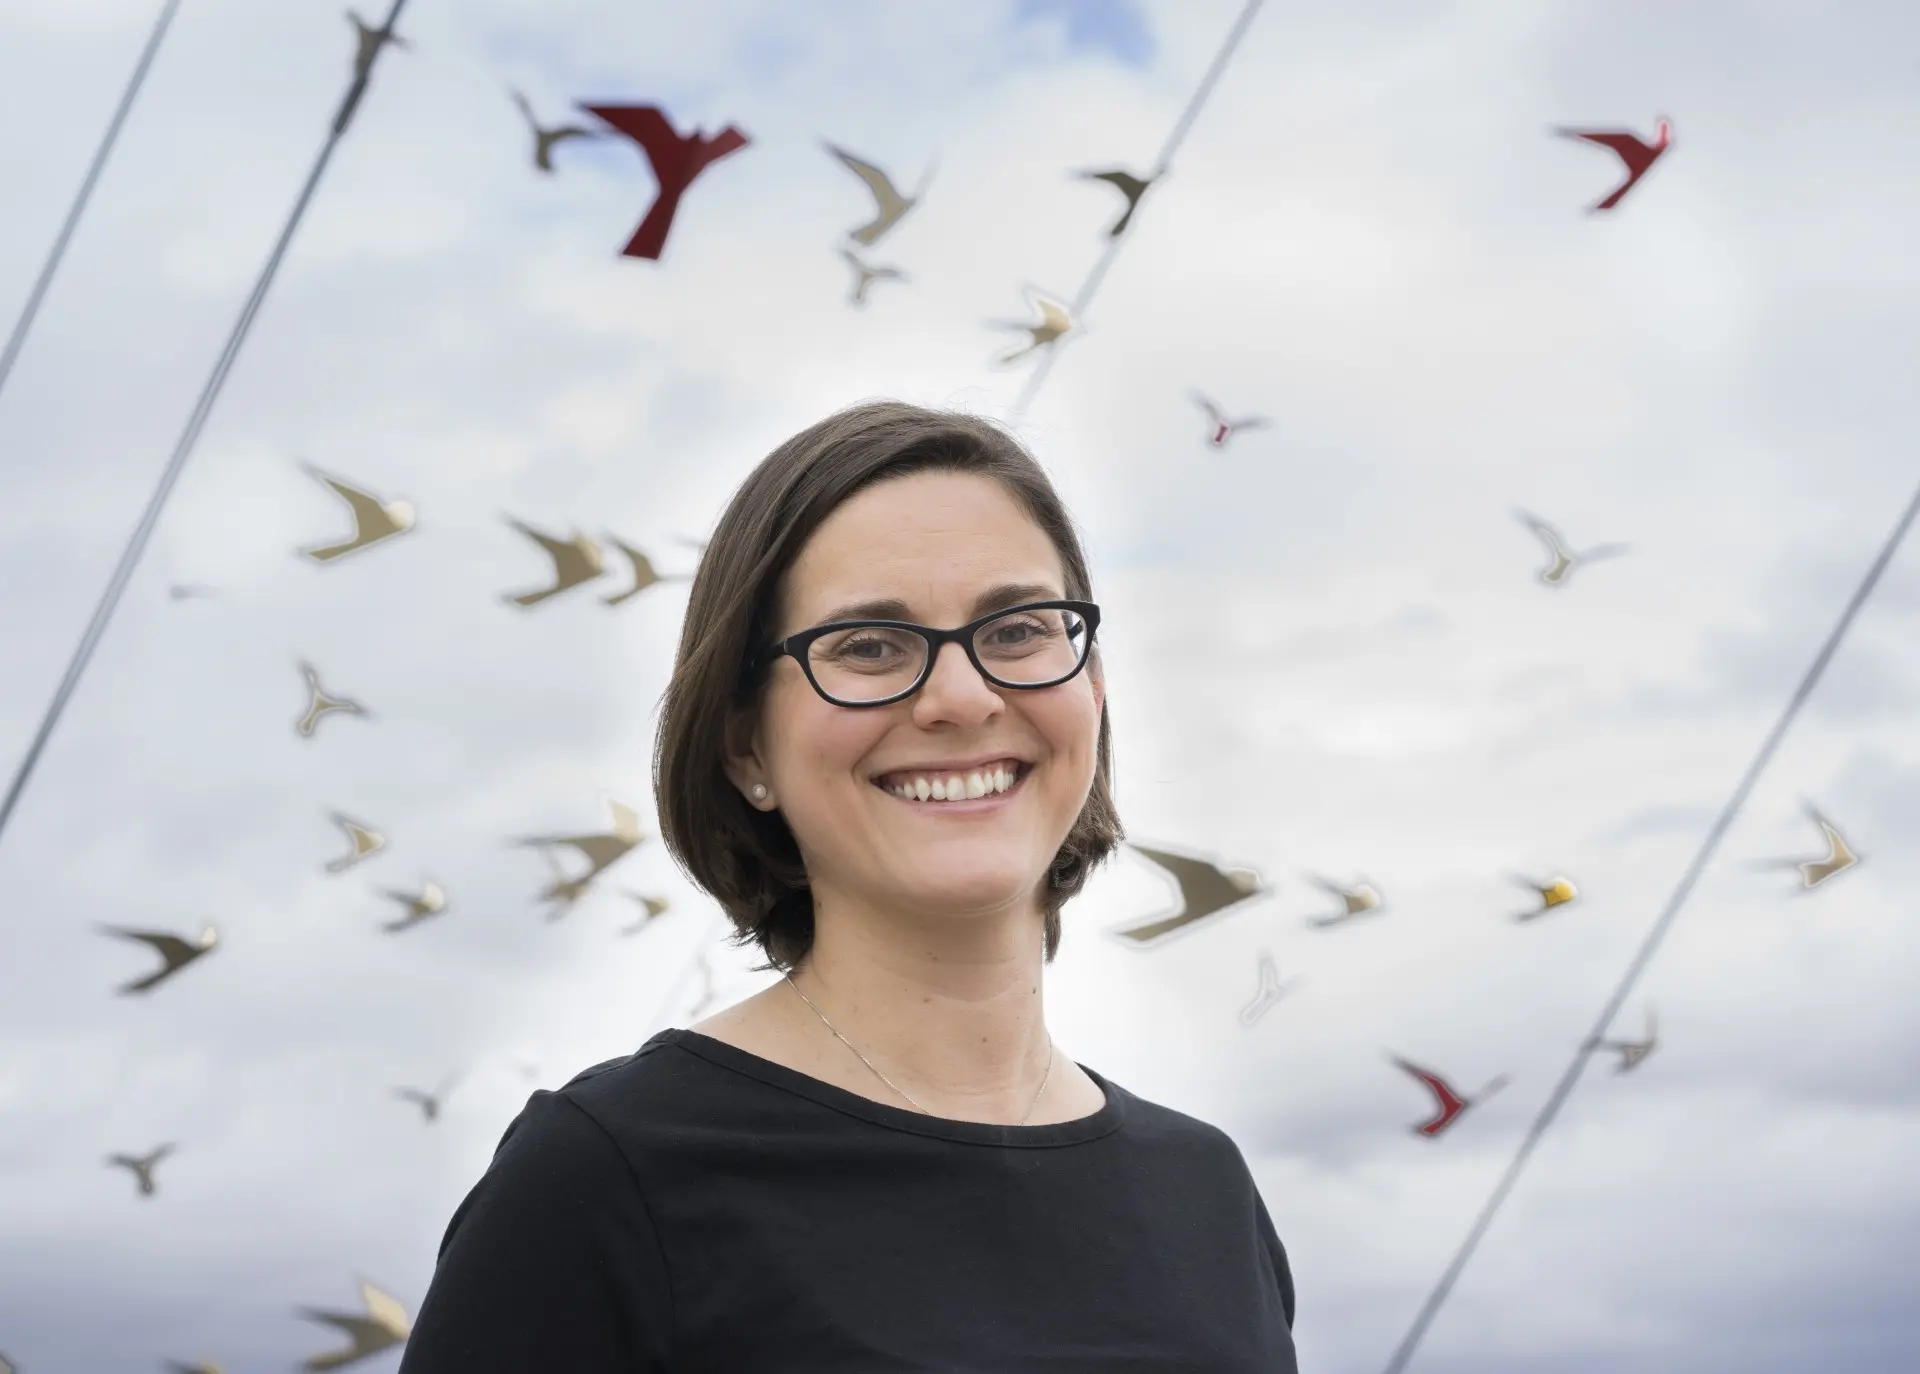 A light-skinned woman is photographed from the chest up. She smiles warmly at the camera against a blue sky with white clouds and what appears to be paper cranes hung on ropes. She wears a black shirt and black-rimmed glasses.